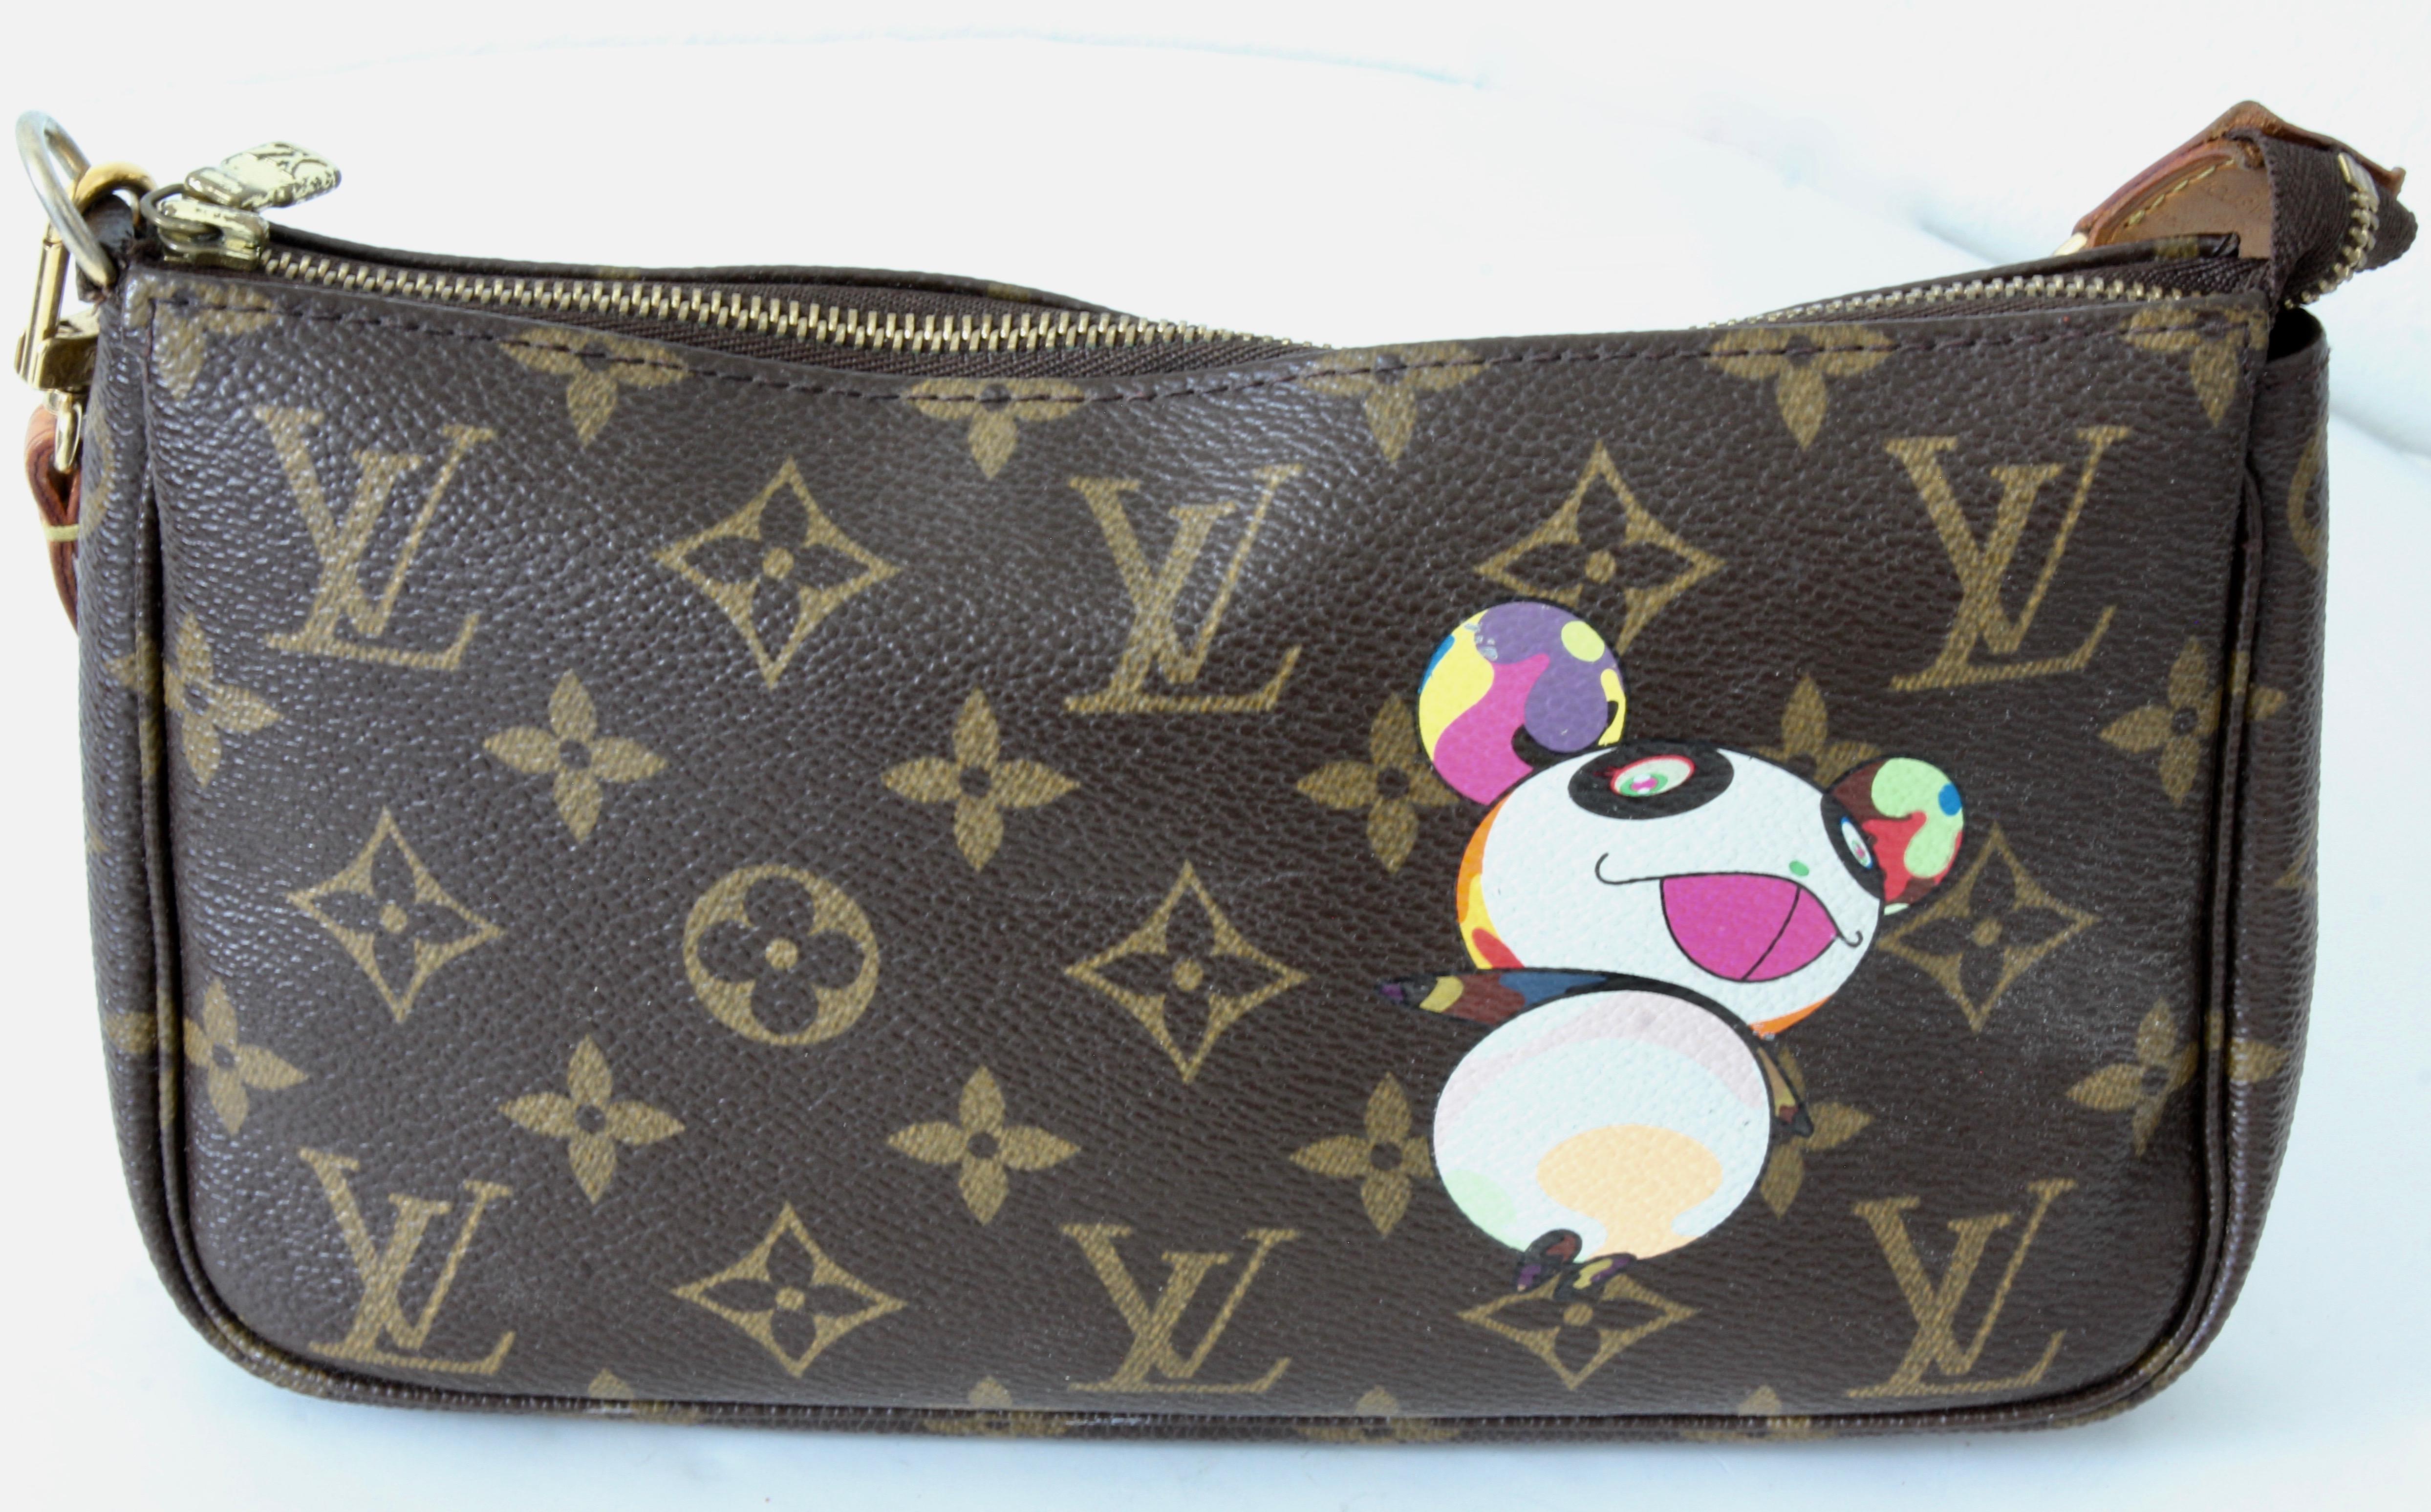 This chic cosmetics case is crafted of Louis Vuitton monogram on toile canvas with artist Takashi Murakami designed panda print on front and rear. The pochette features a vachetta cowhide leather wrist strap with a brass D-ring end to attach to any